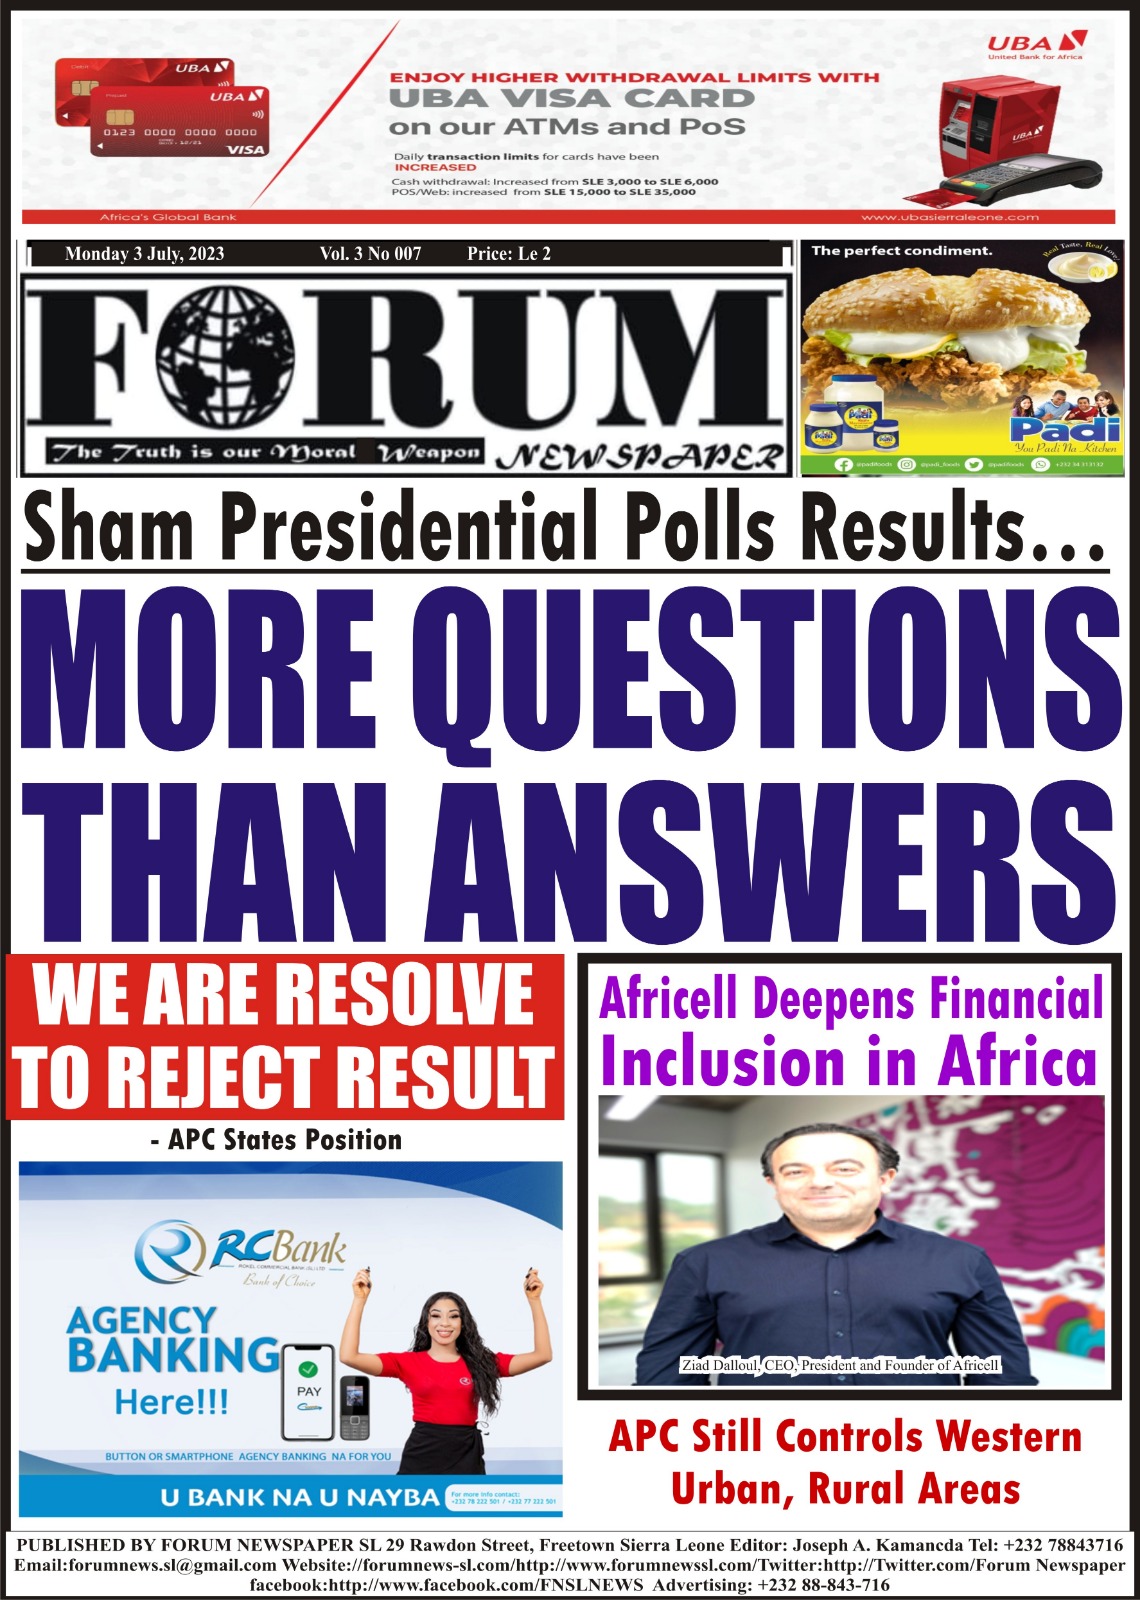 Sham Presidential Polls Results… MORE QUESTIONS THAN ANSWERS